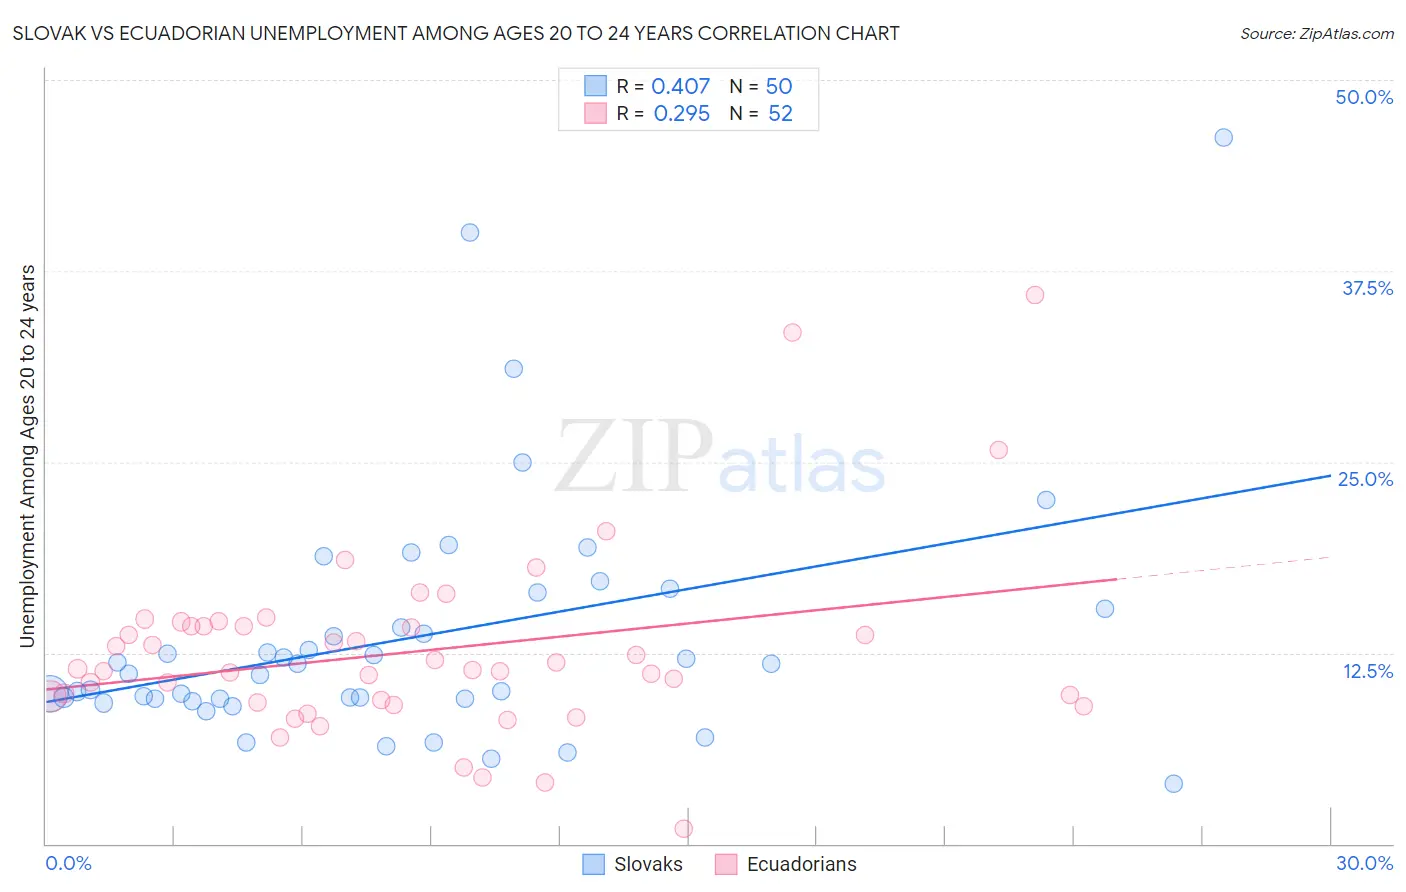 Slovak vs Ecuadorian Unemployment Among Ages 20 to 24 years